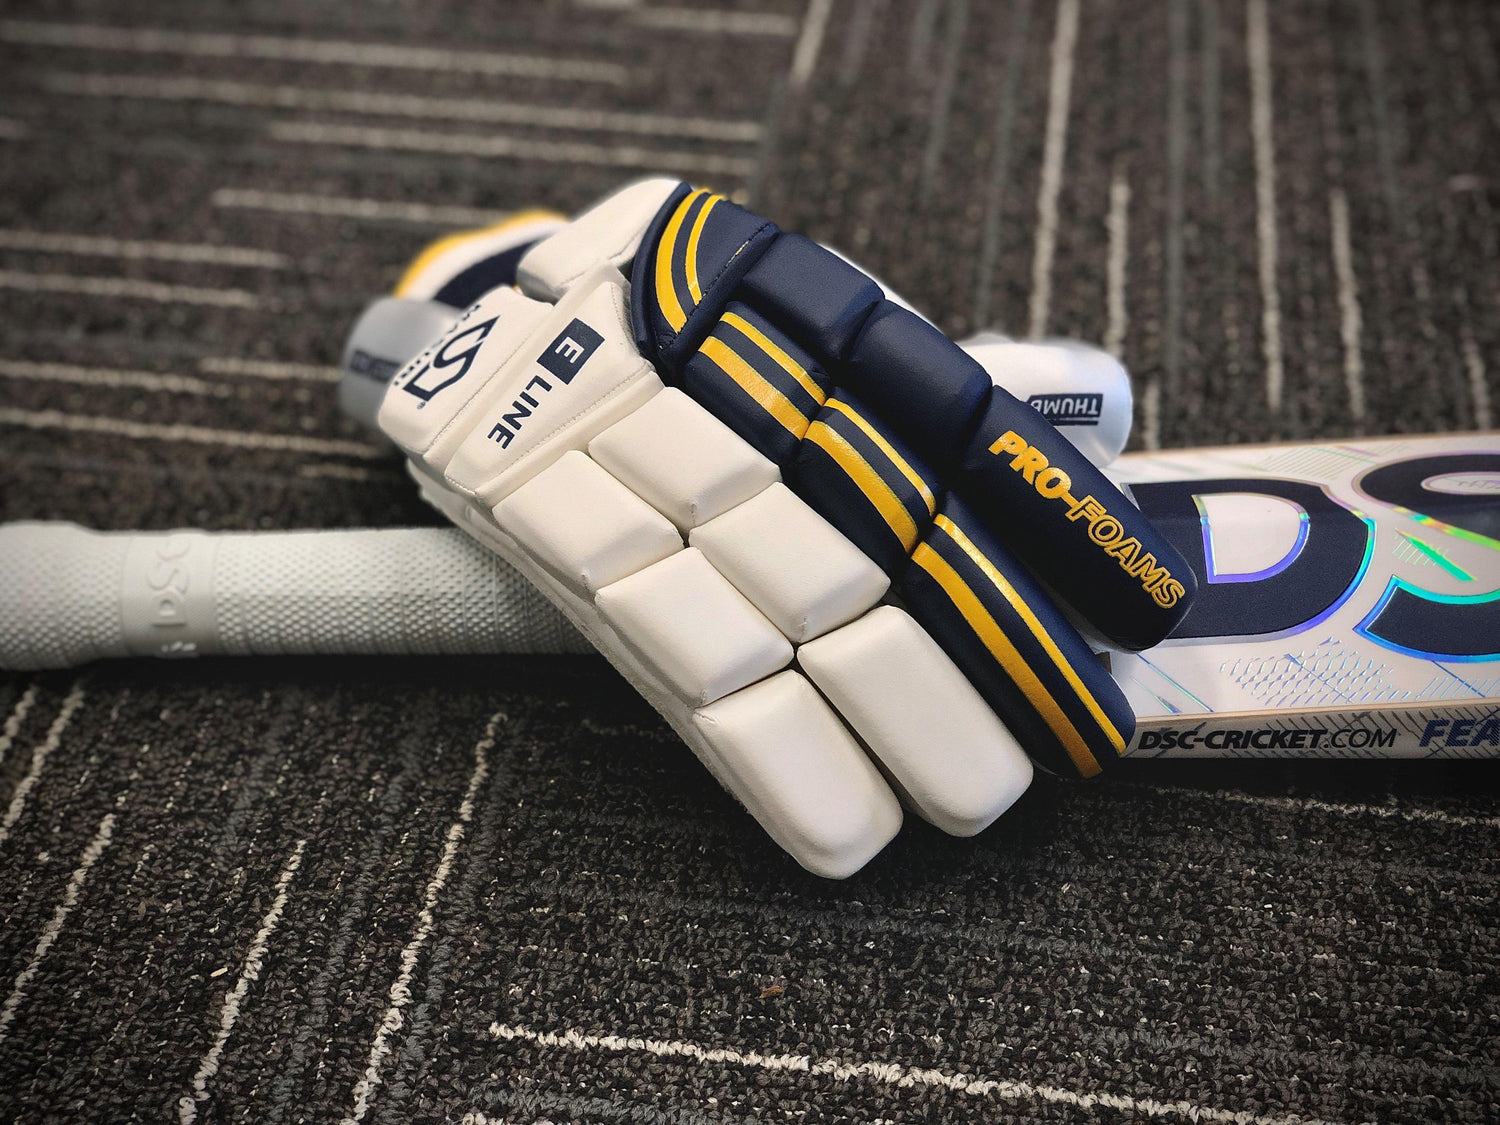 The Different Types of Cricket Batting Gloves - AT Sports